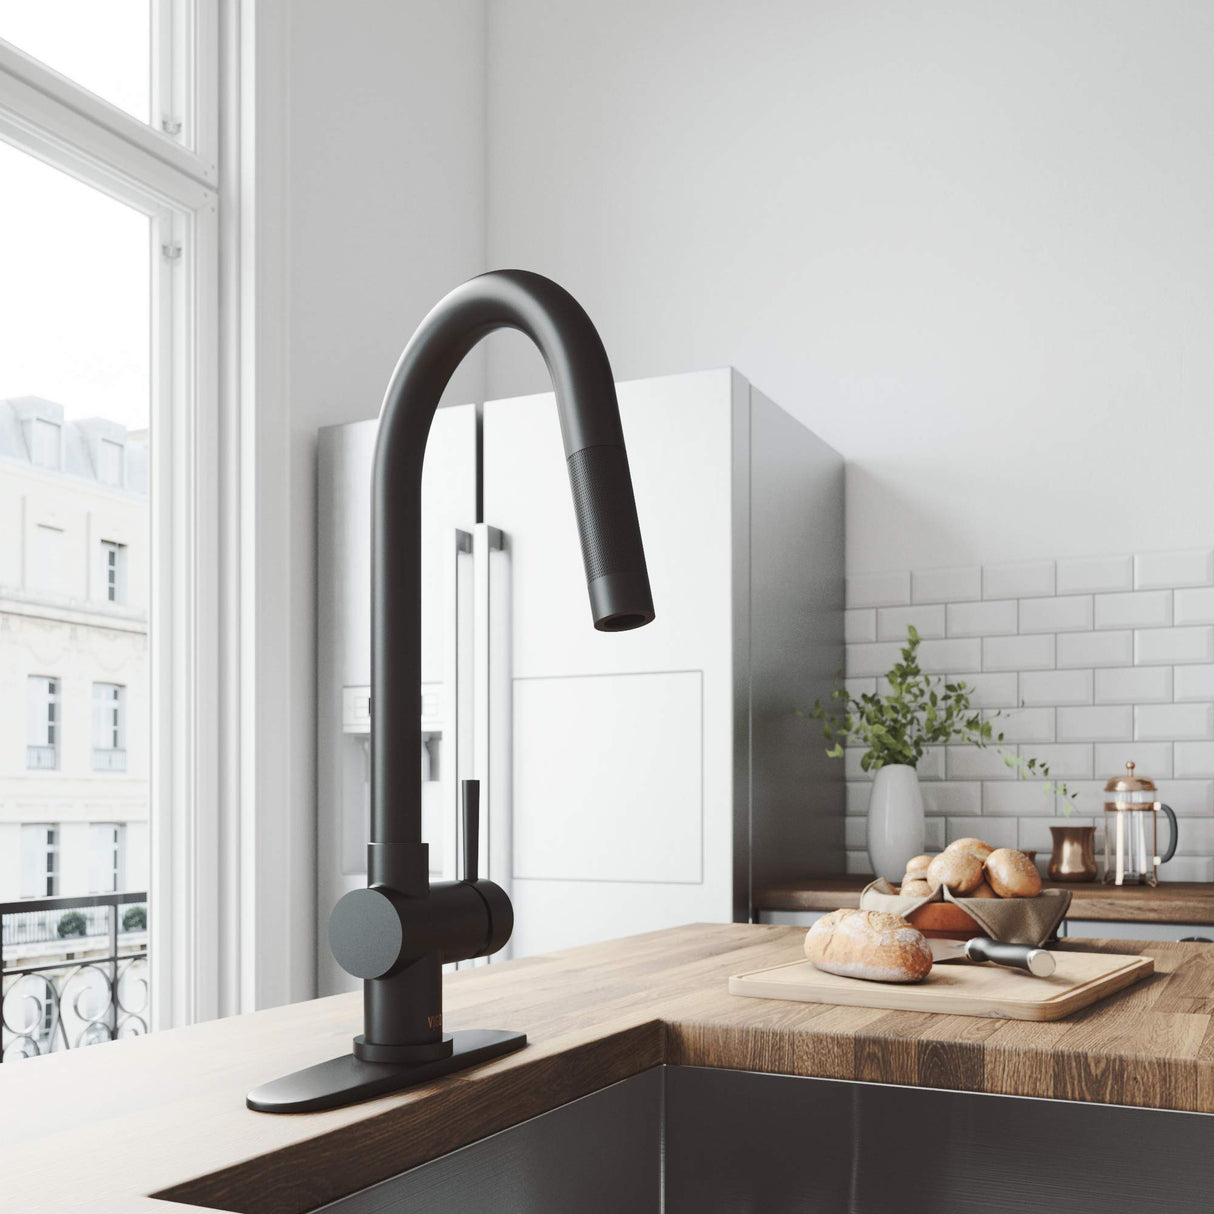 VIGO VG02008MBK1 17" H Gramercy Single-Handle with Pull-Down Sprayer Kitchen Faucet with Deck Plate in Matte Black